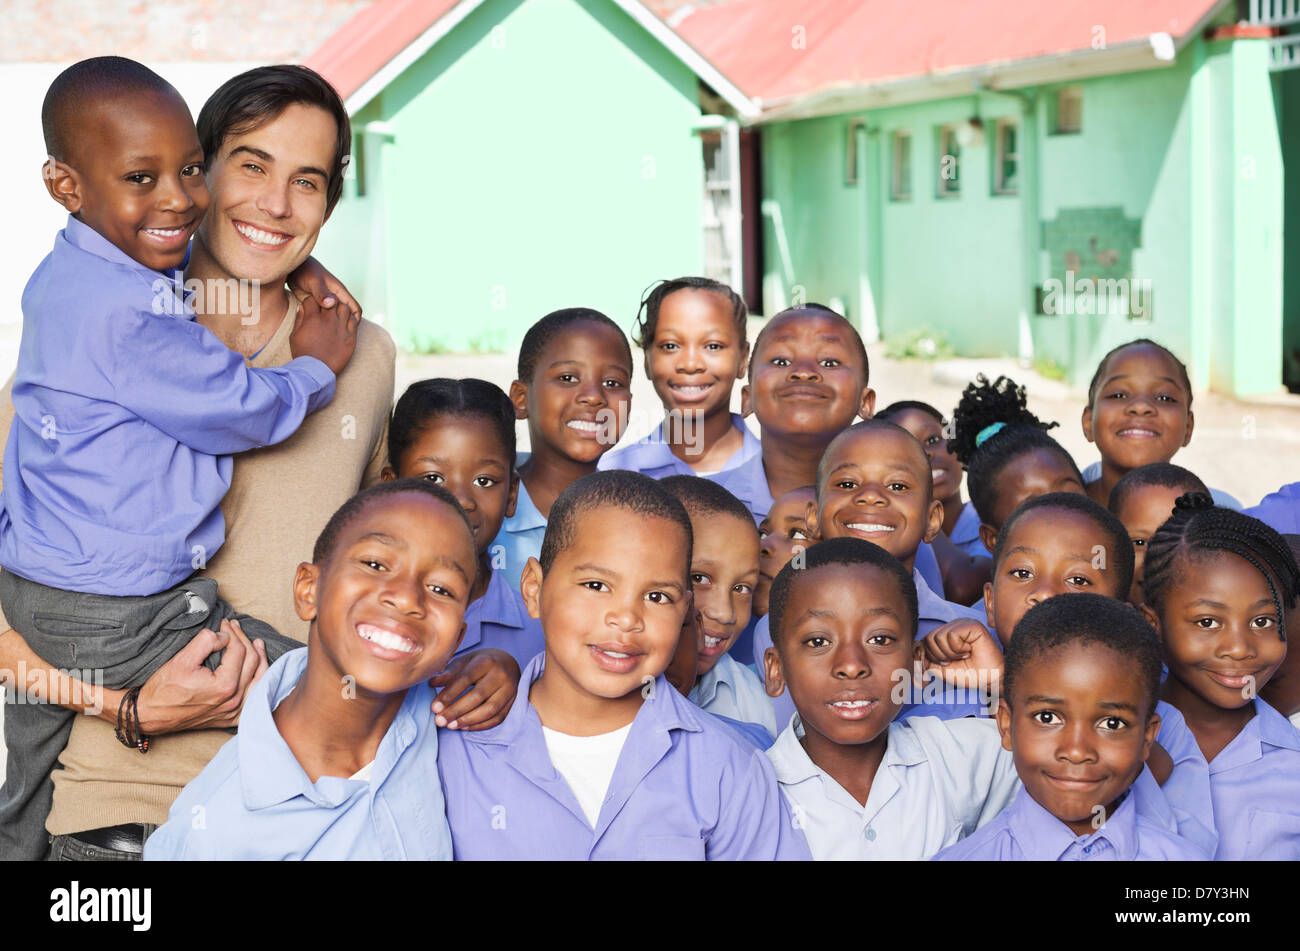 Students and teacher smiling outdoors Stock Photo